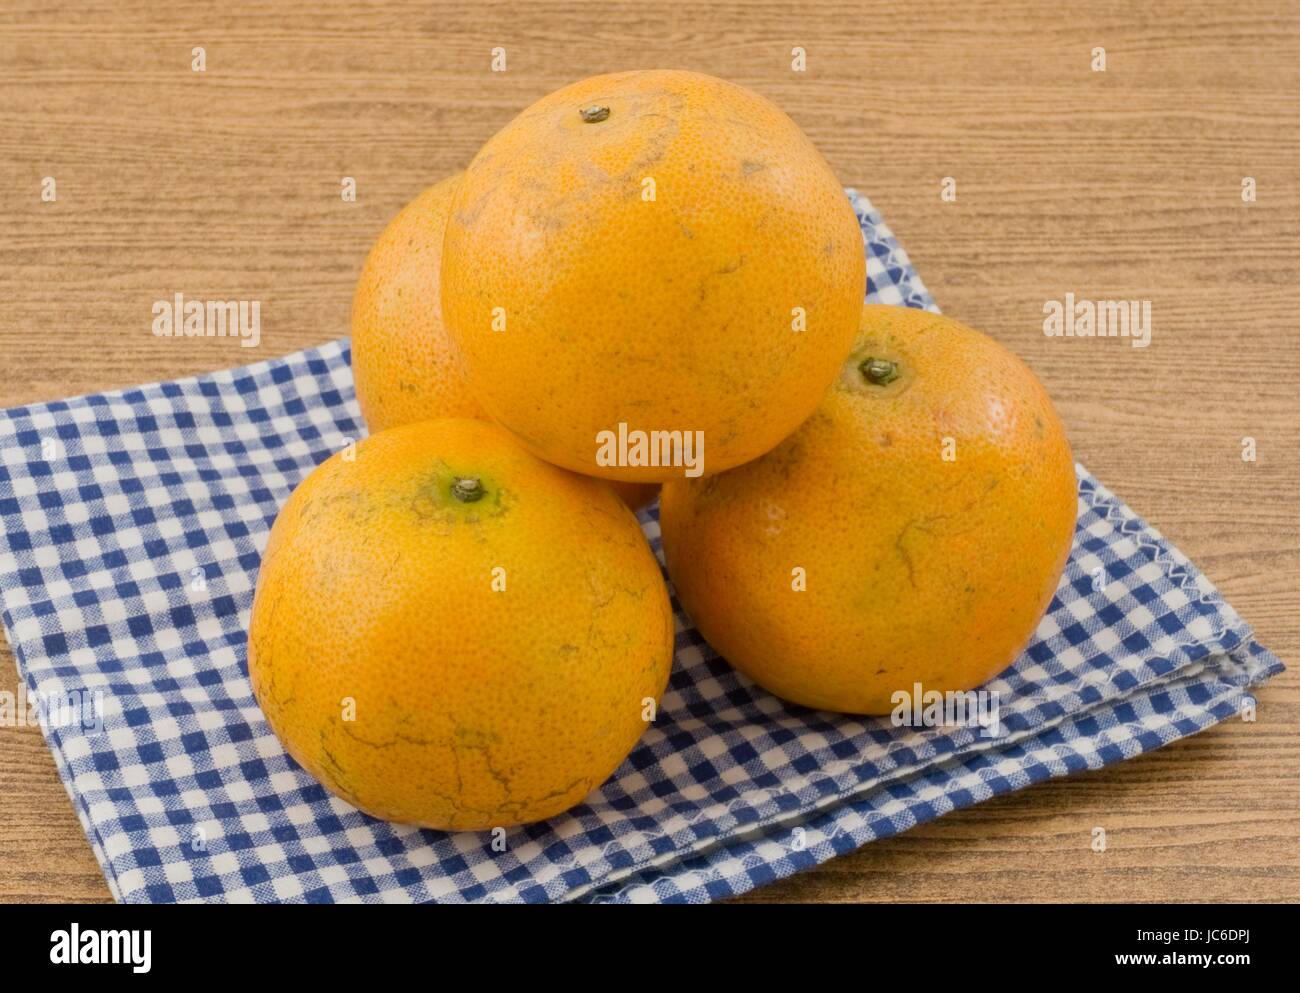 Fresh Ripe and Sweet Oranges on A Wooden Table, Orange Is The Fruit of The Citrus Species. Stock Photo